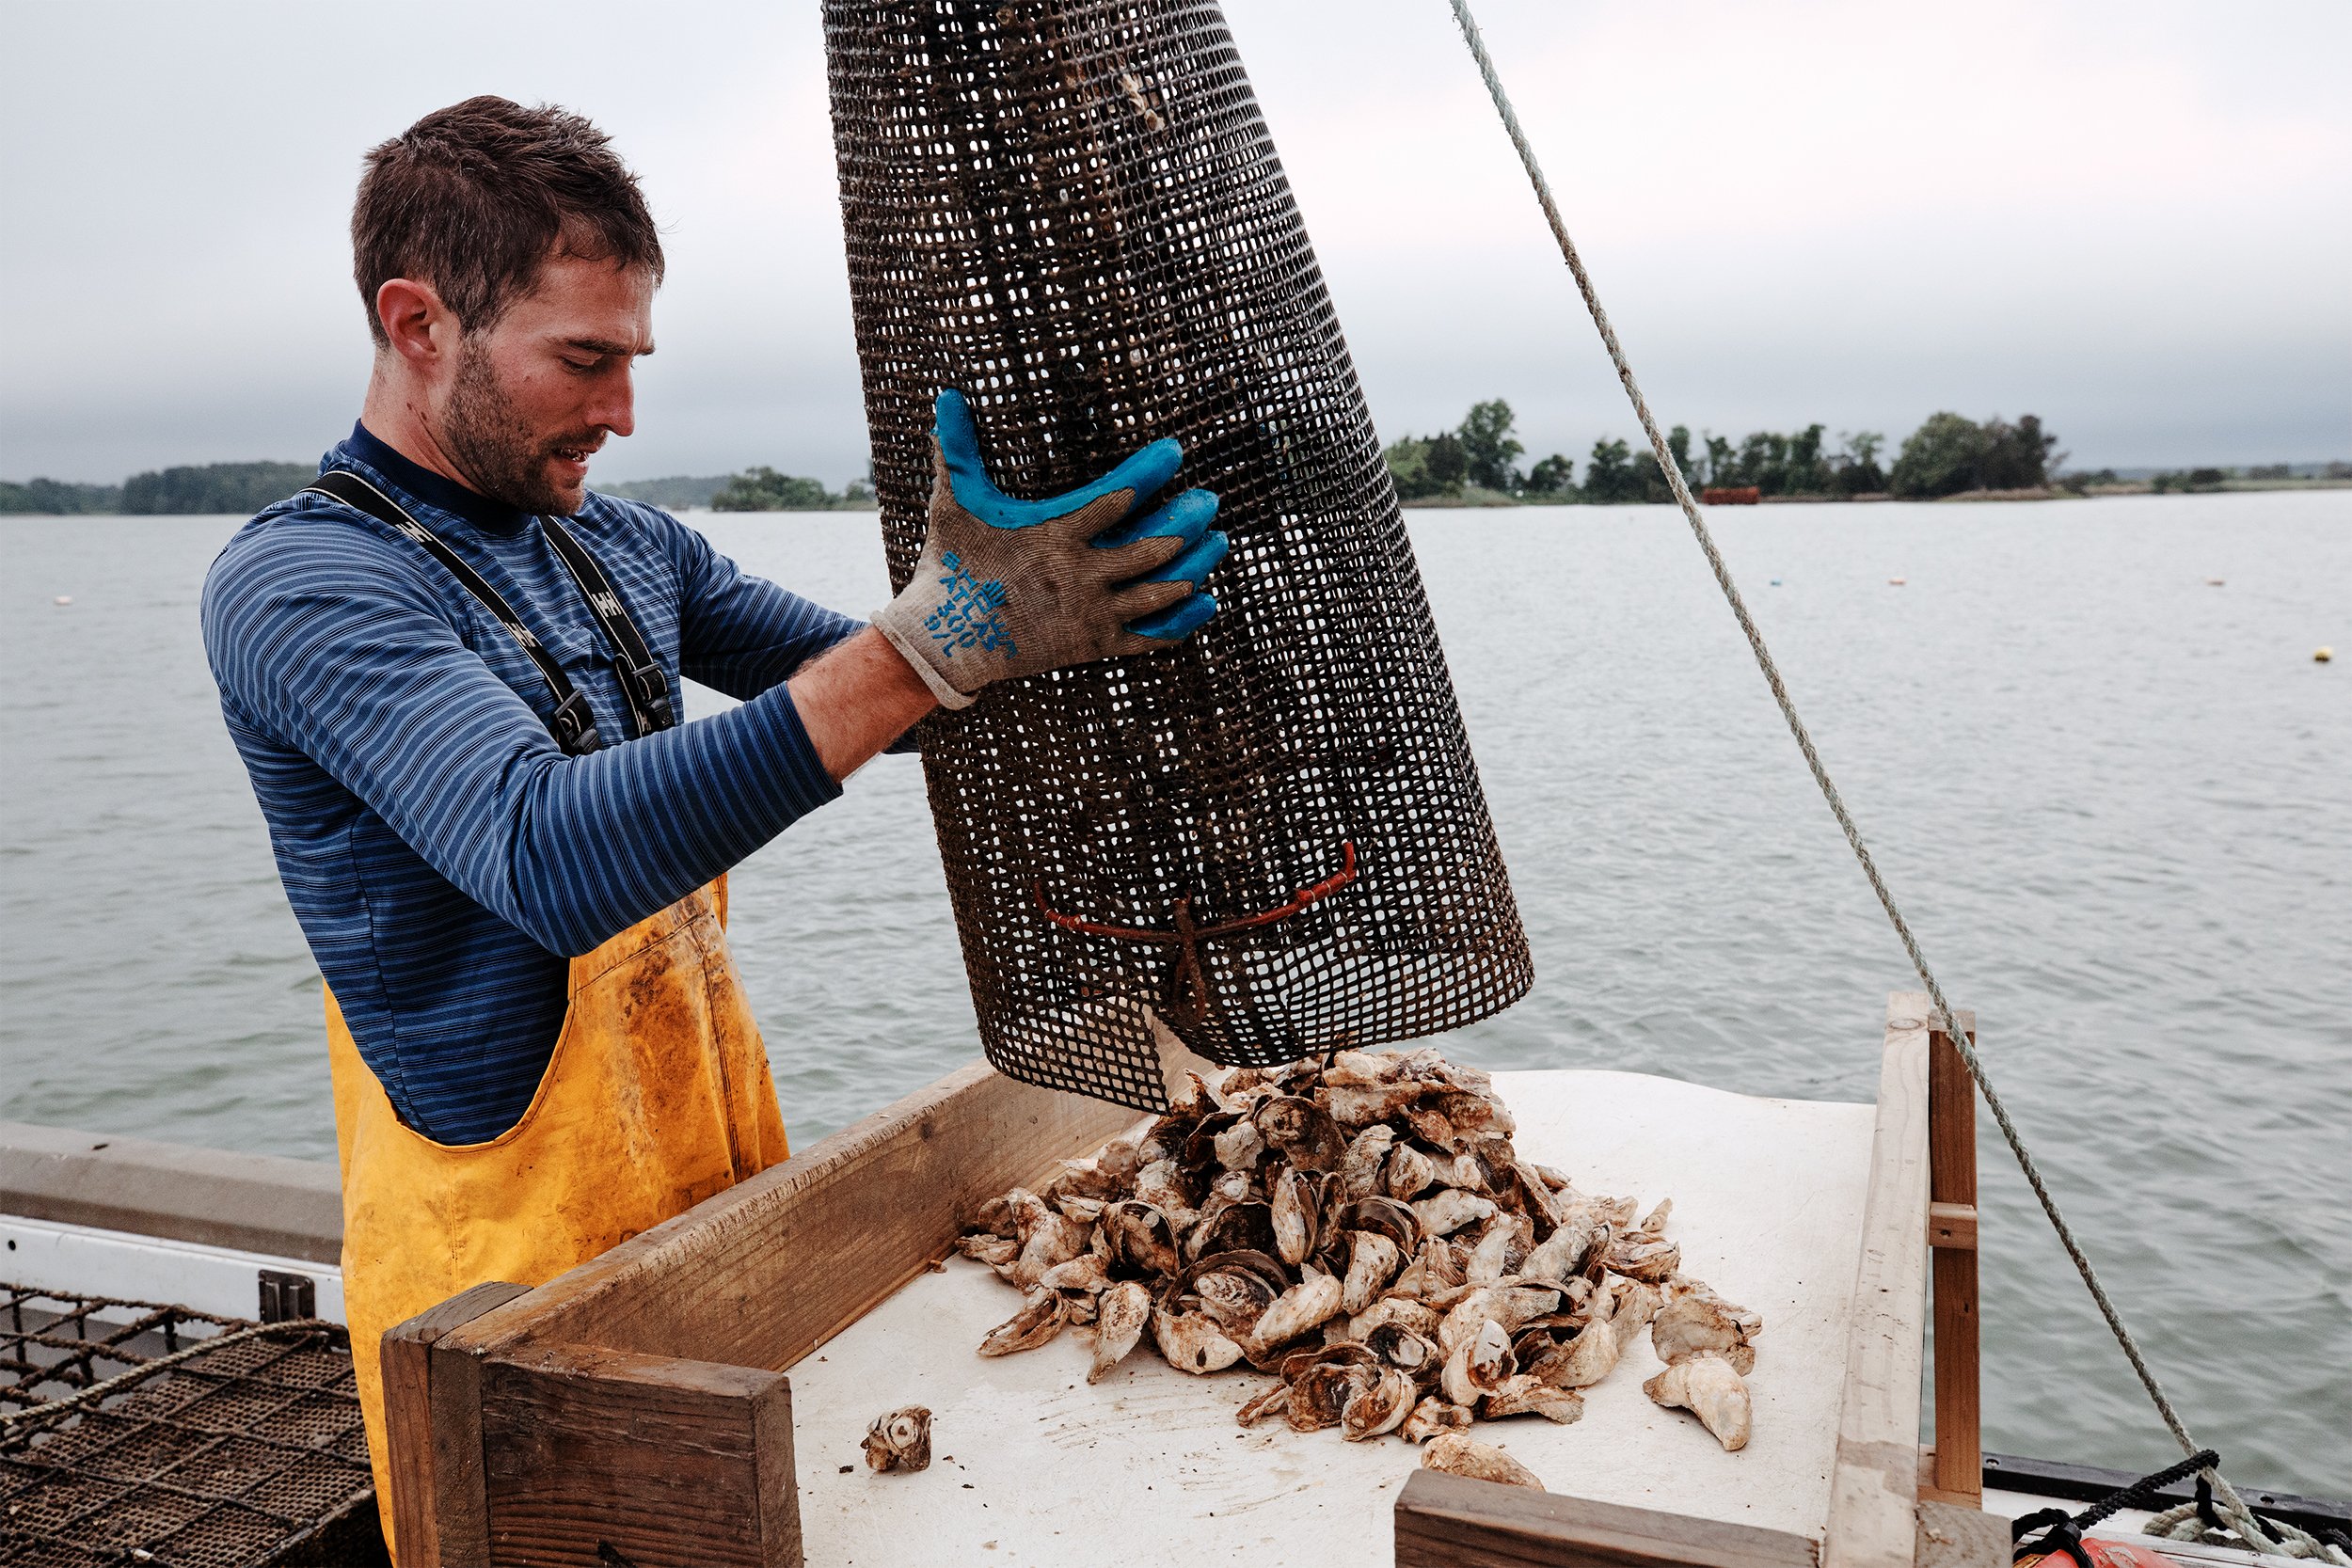  Isaac Wilding of St. Michaels Oyster Company harvests oysters from his leased oyster farm on Cummings Creek in Wittman. Wilding began growing oysters three years ago as a passion project, with oyster seed from Phillips Wharf Environmental Center in 